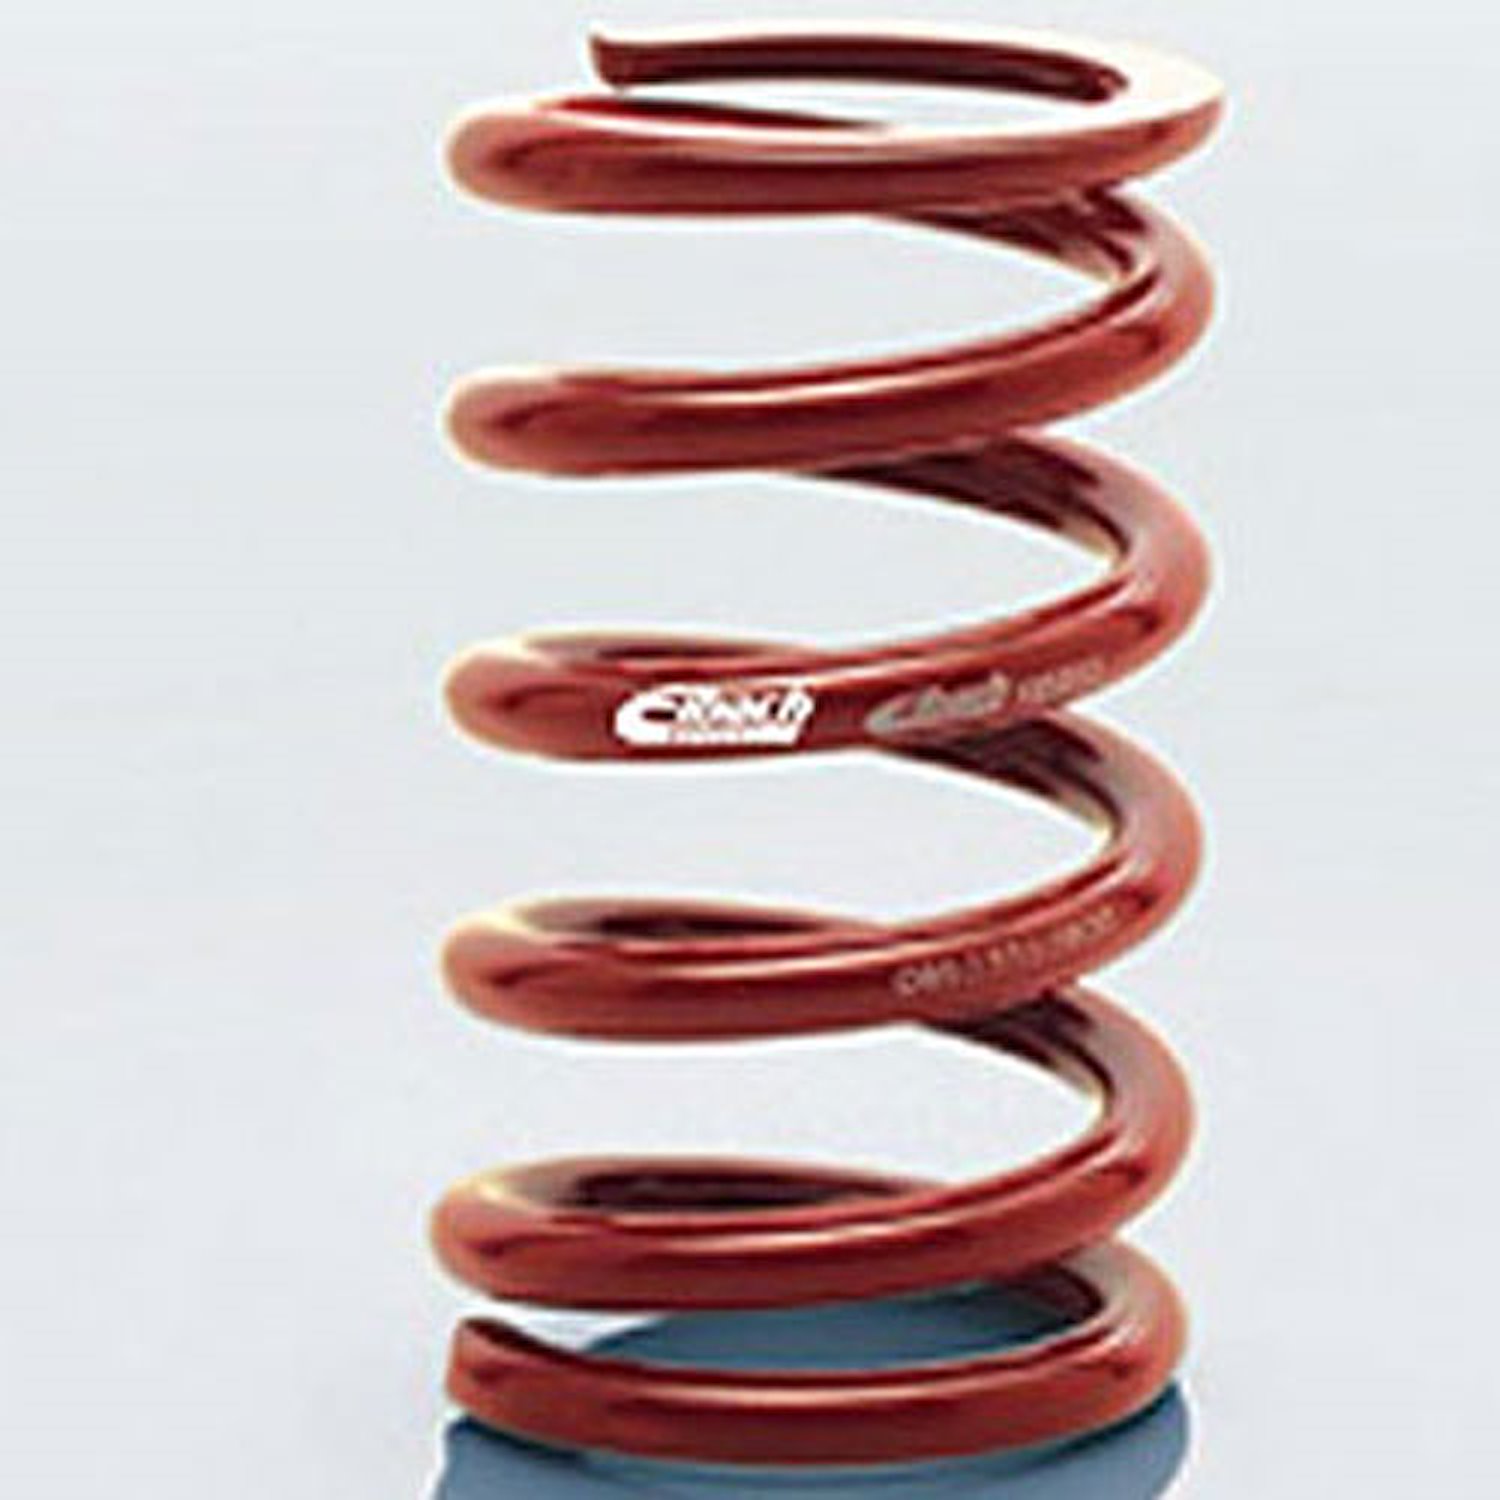 0950.550.0500 EIBACH CONVENTIONAL FRONT SPRING